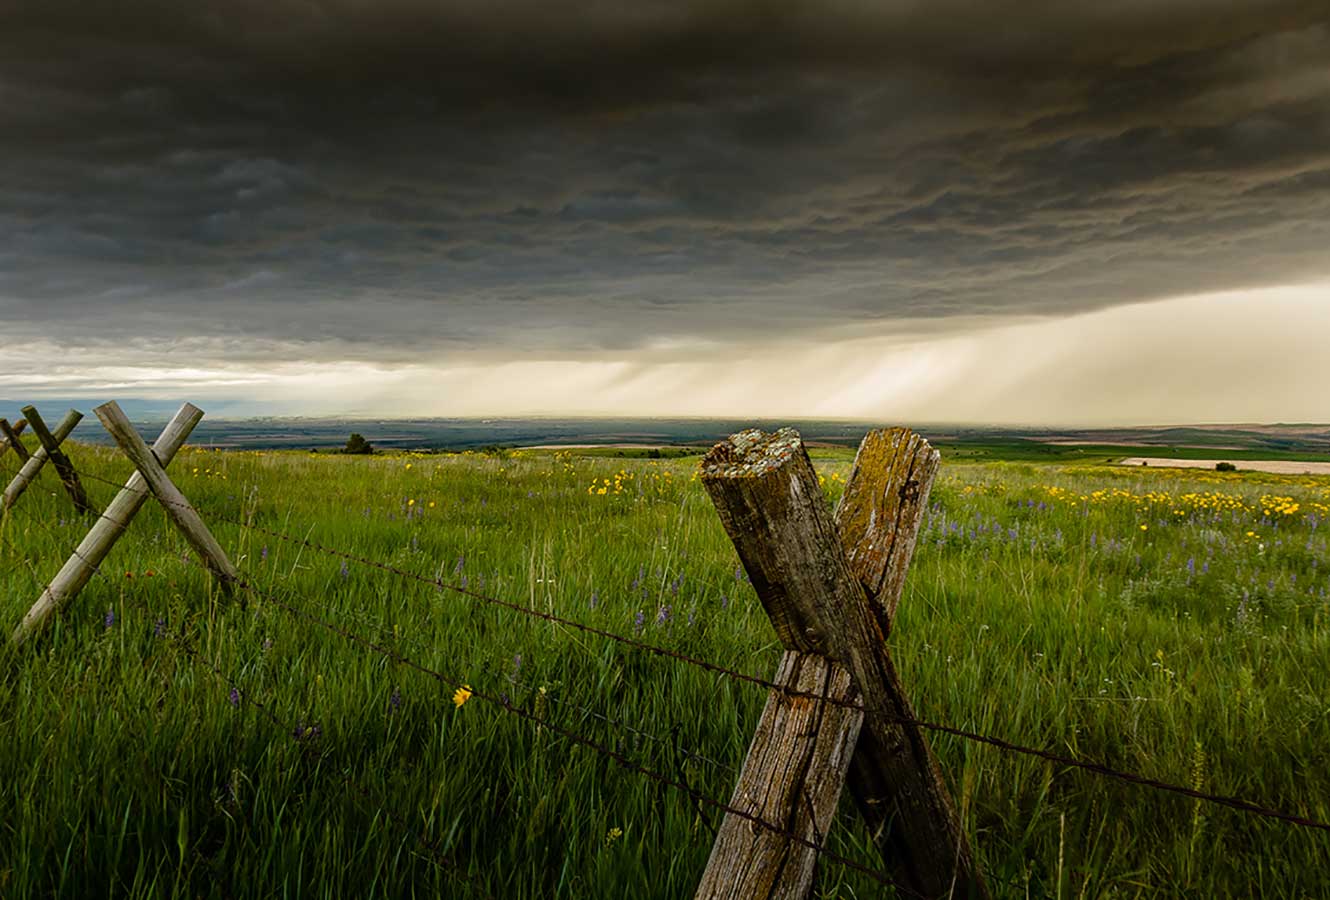 Barbed wire fence with storm clouds moving over a field of wildflowers in the background